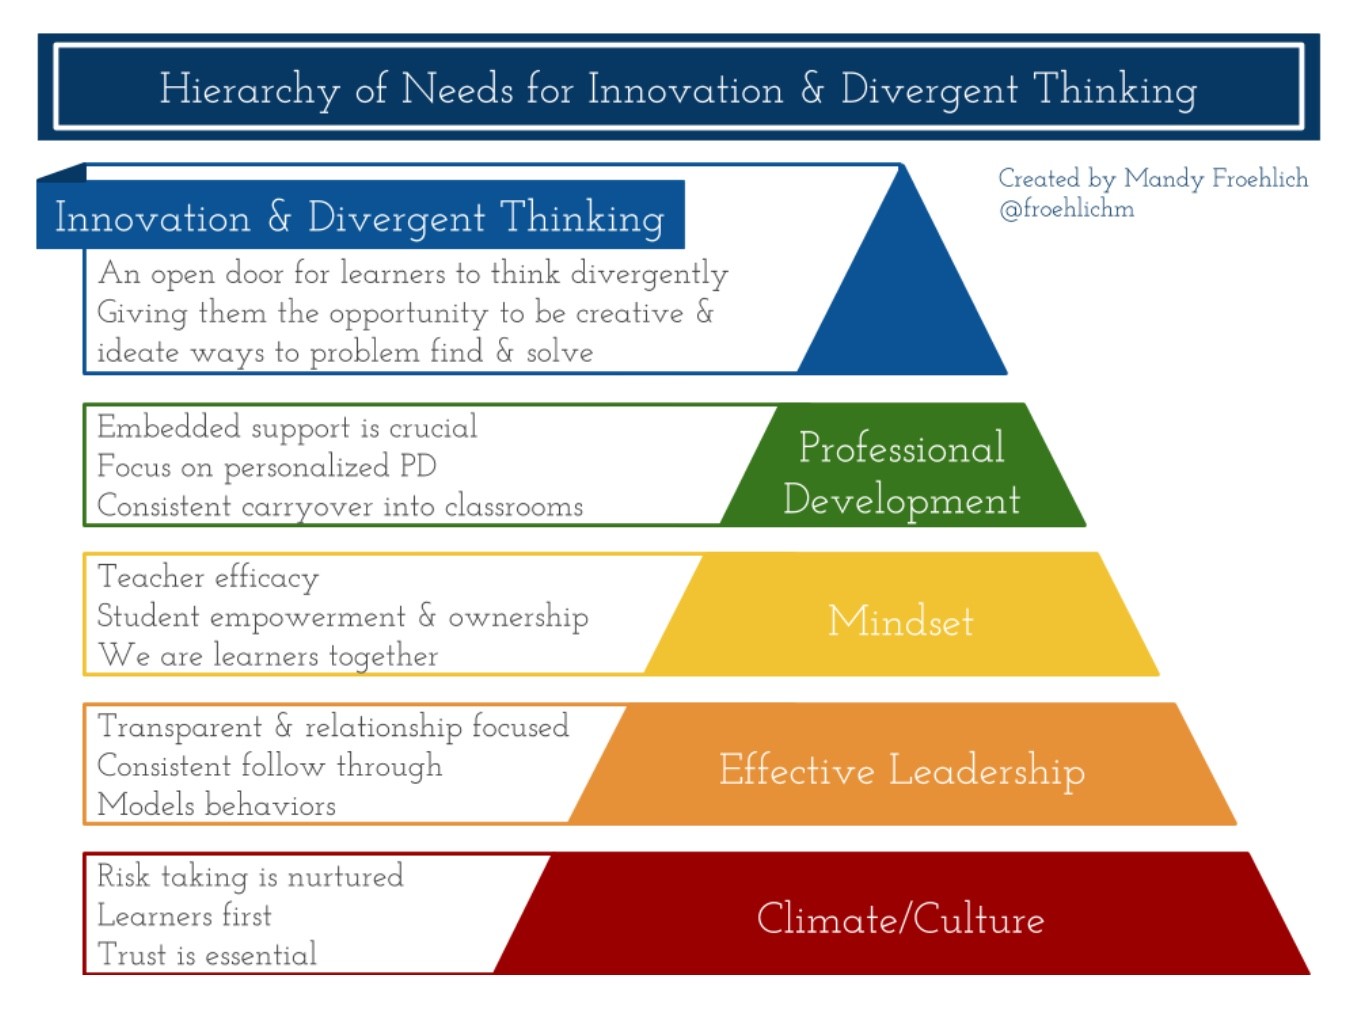 Divergent Thinking and Innovation